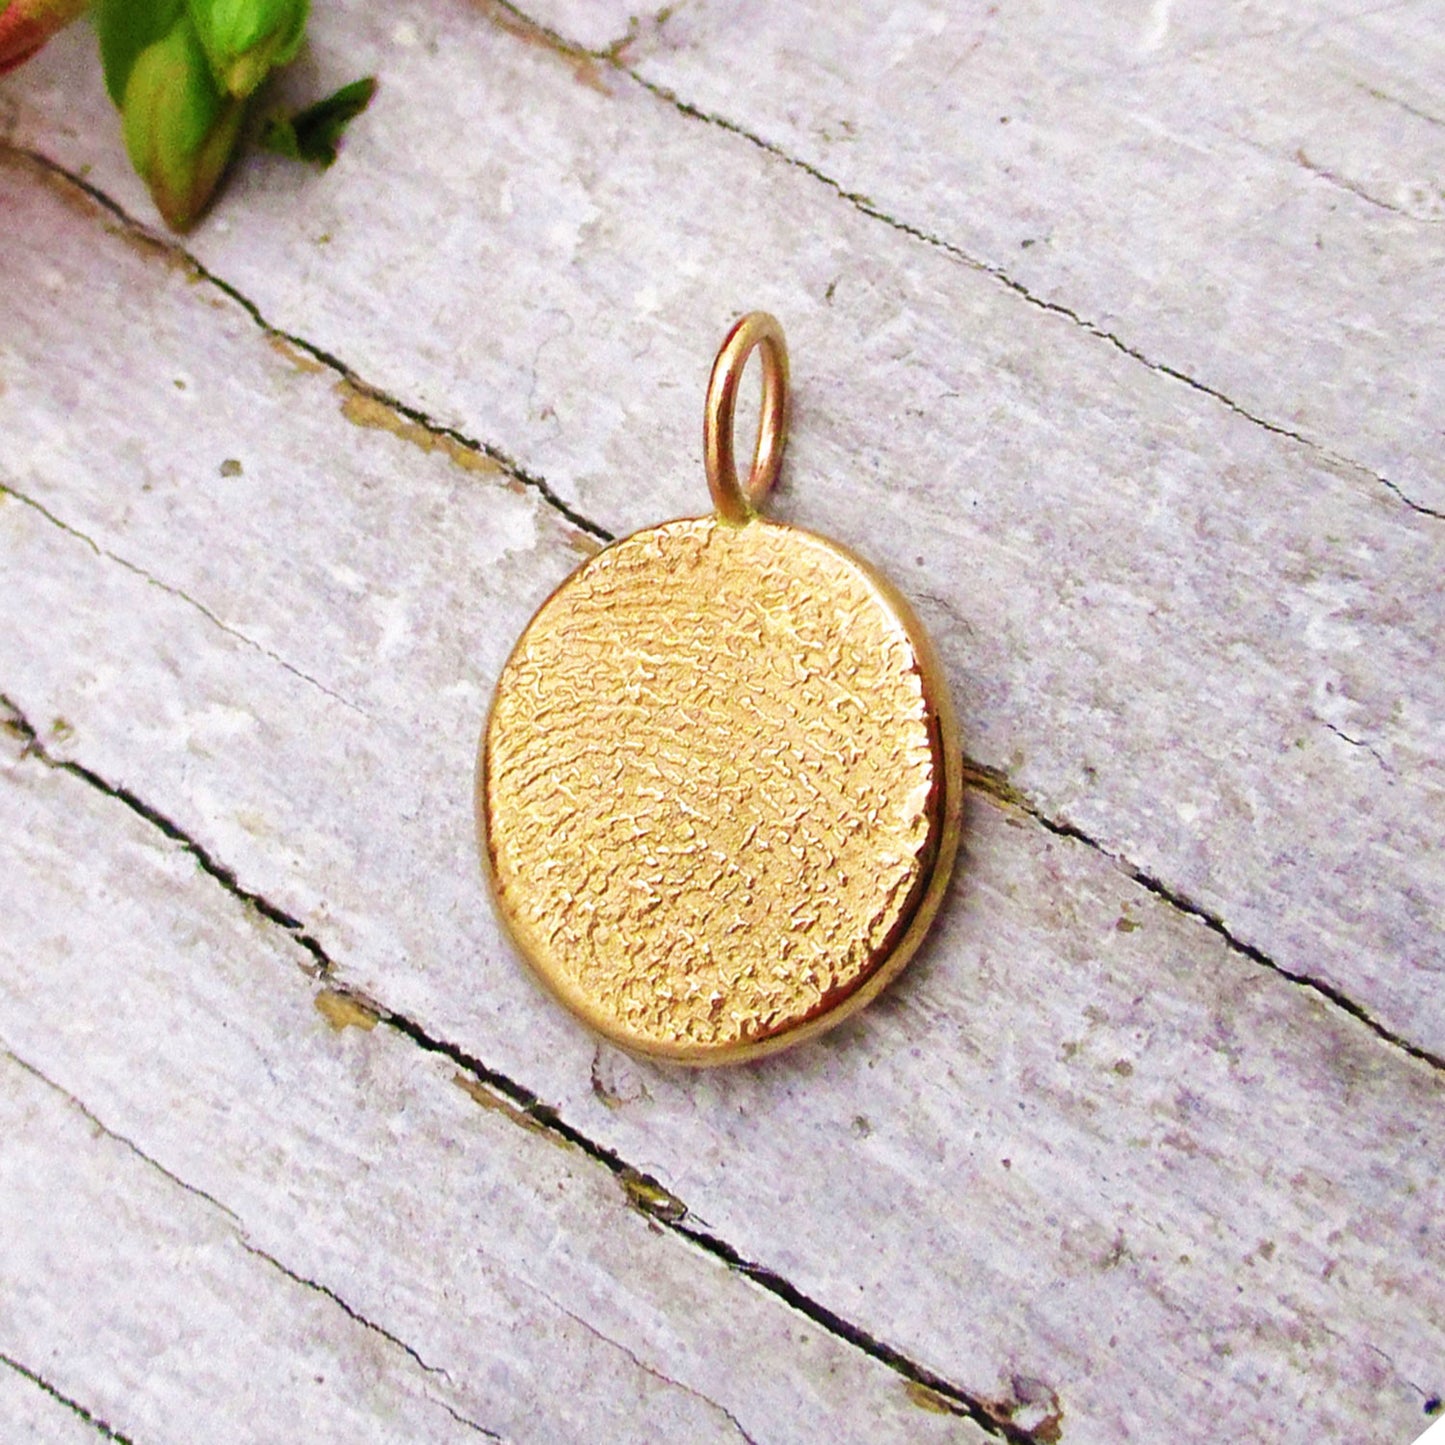 Small Size Solid 14k Gold Organic Wedge Style Fingerprint Pendant from Digital Image